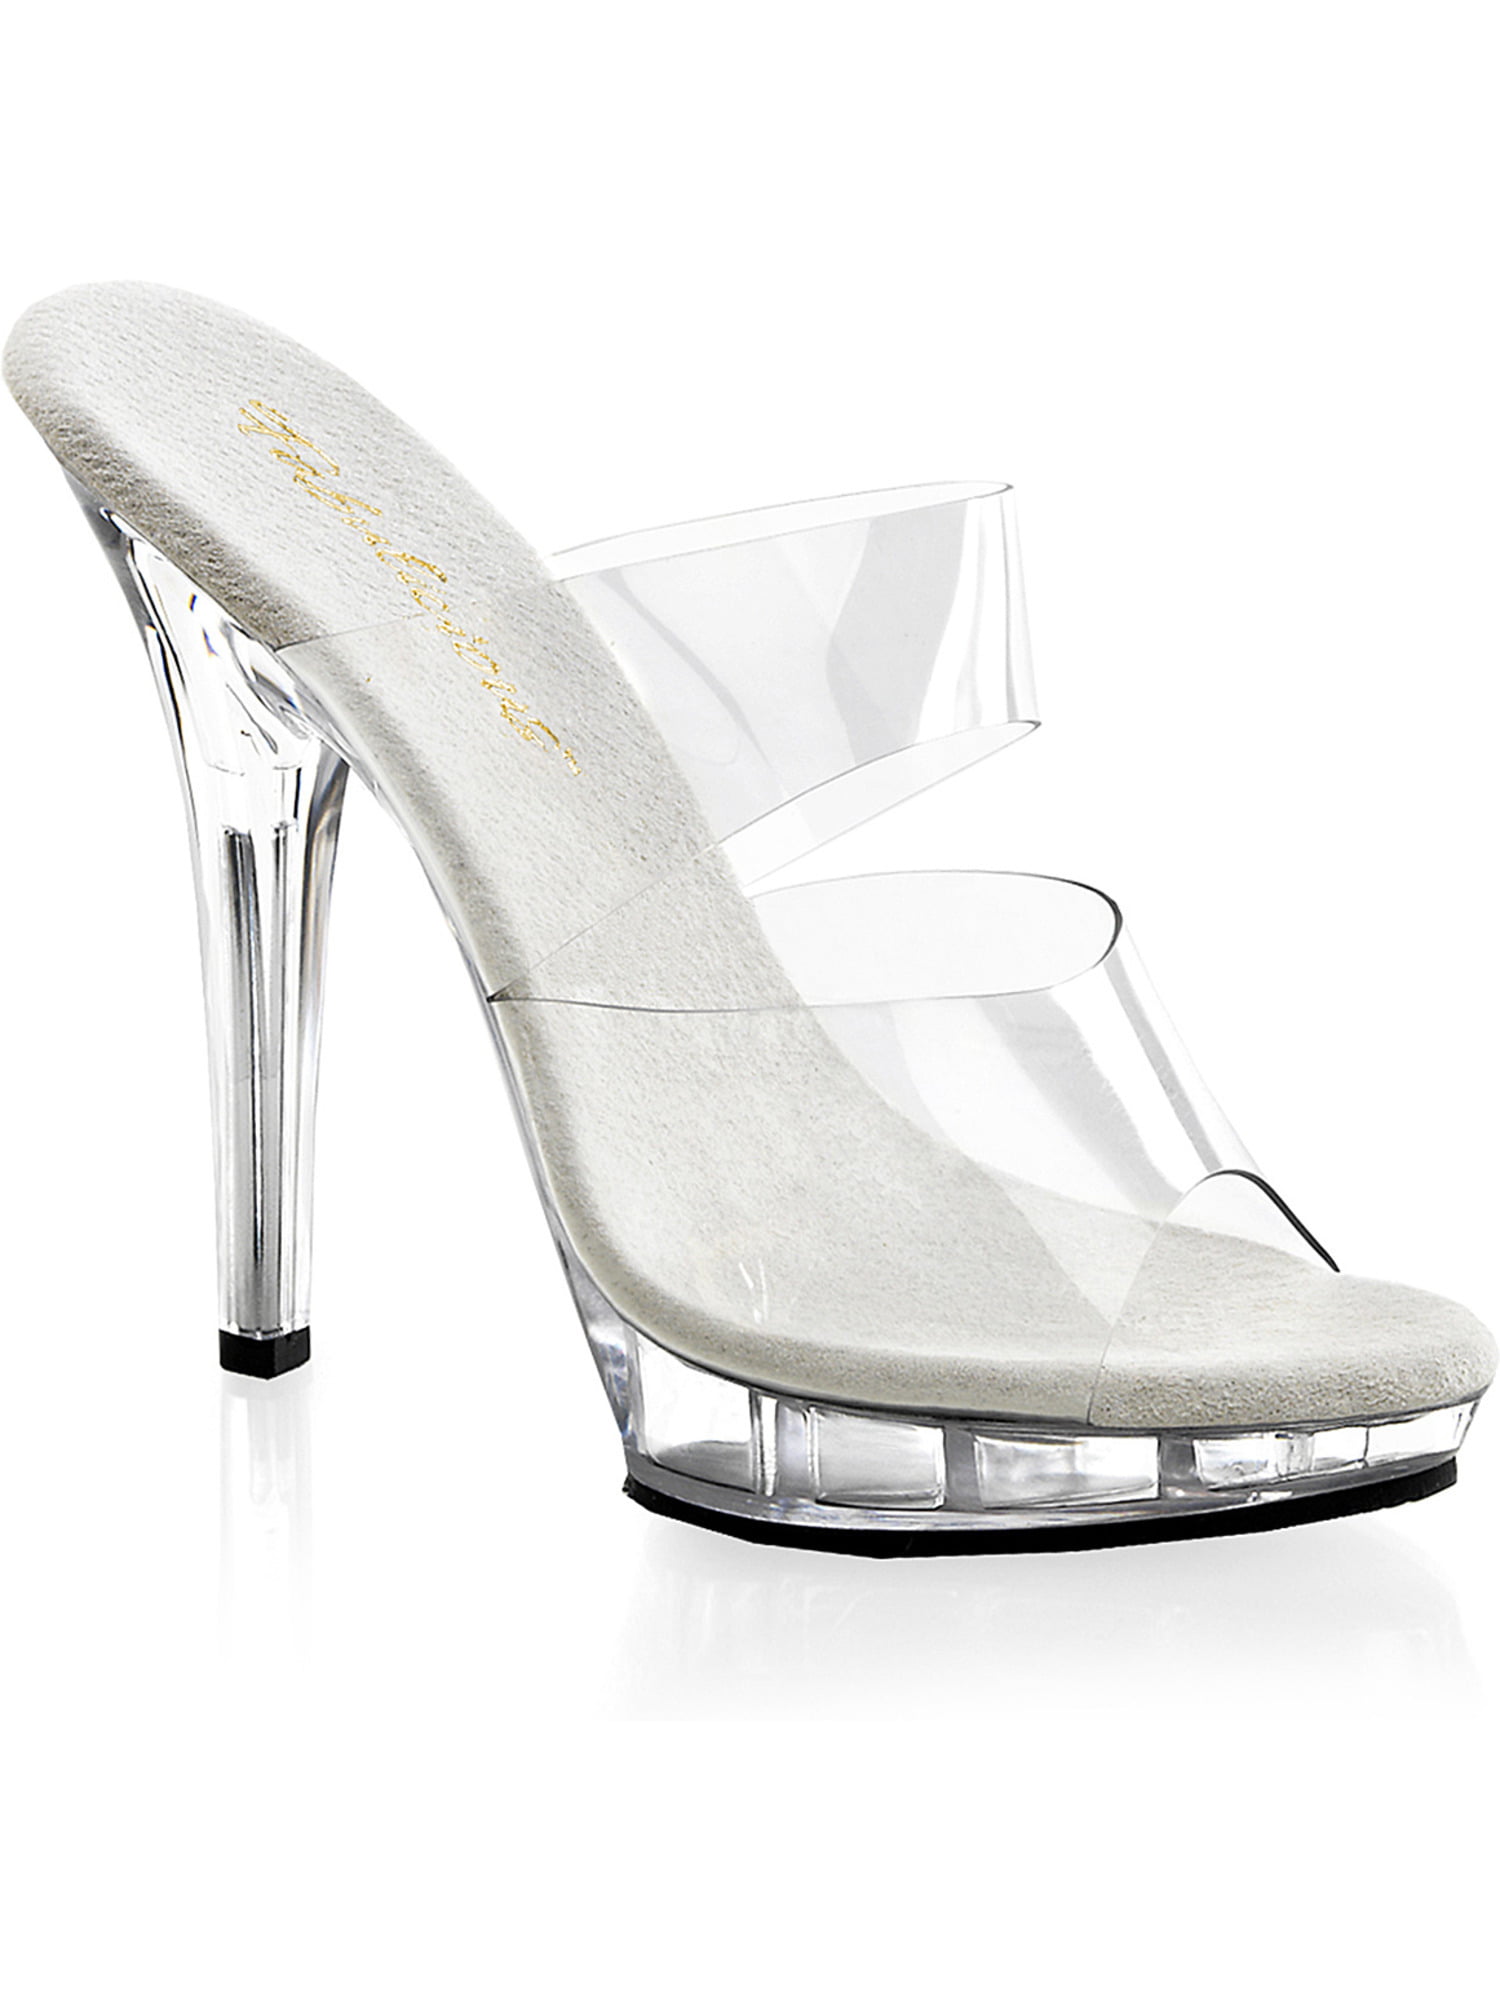 Pleaser - 5 Inch Sexy High Heel Shoe Two-Band Platform S On Shoes Clear ...